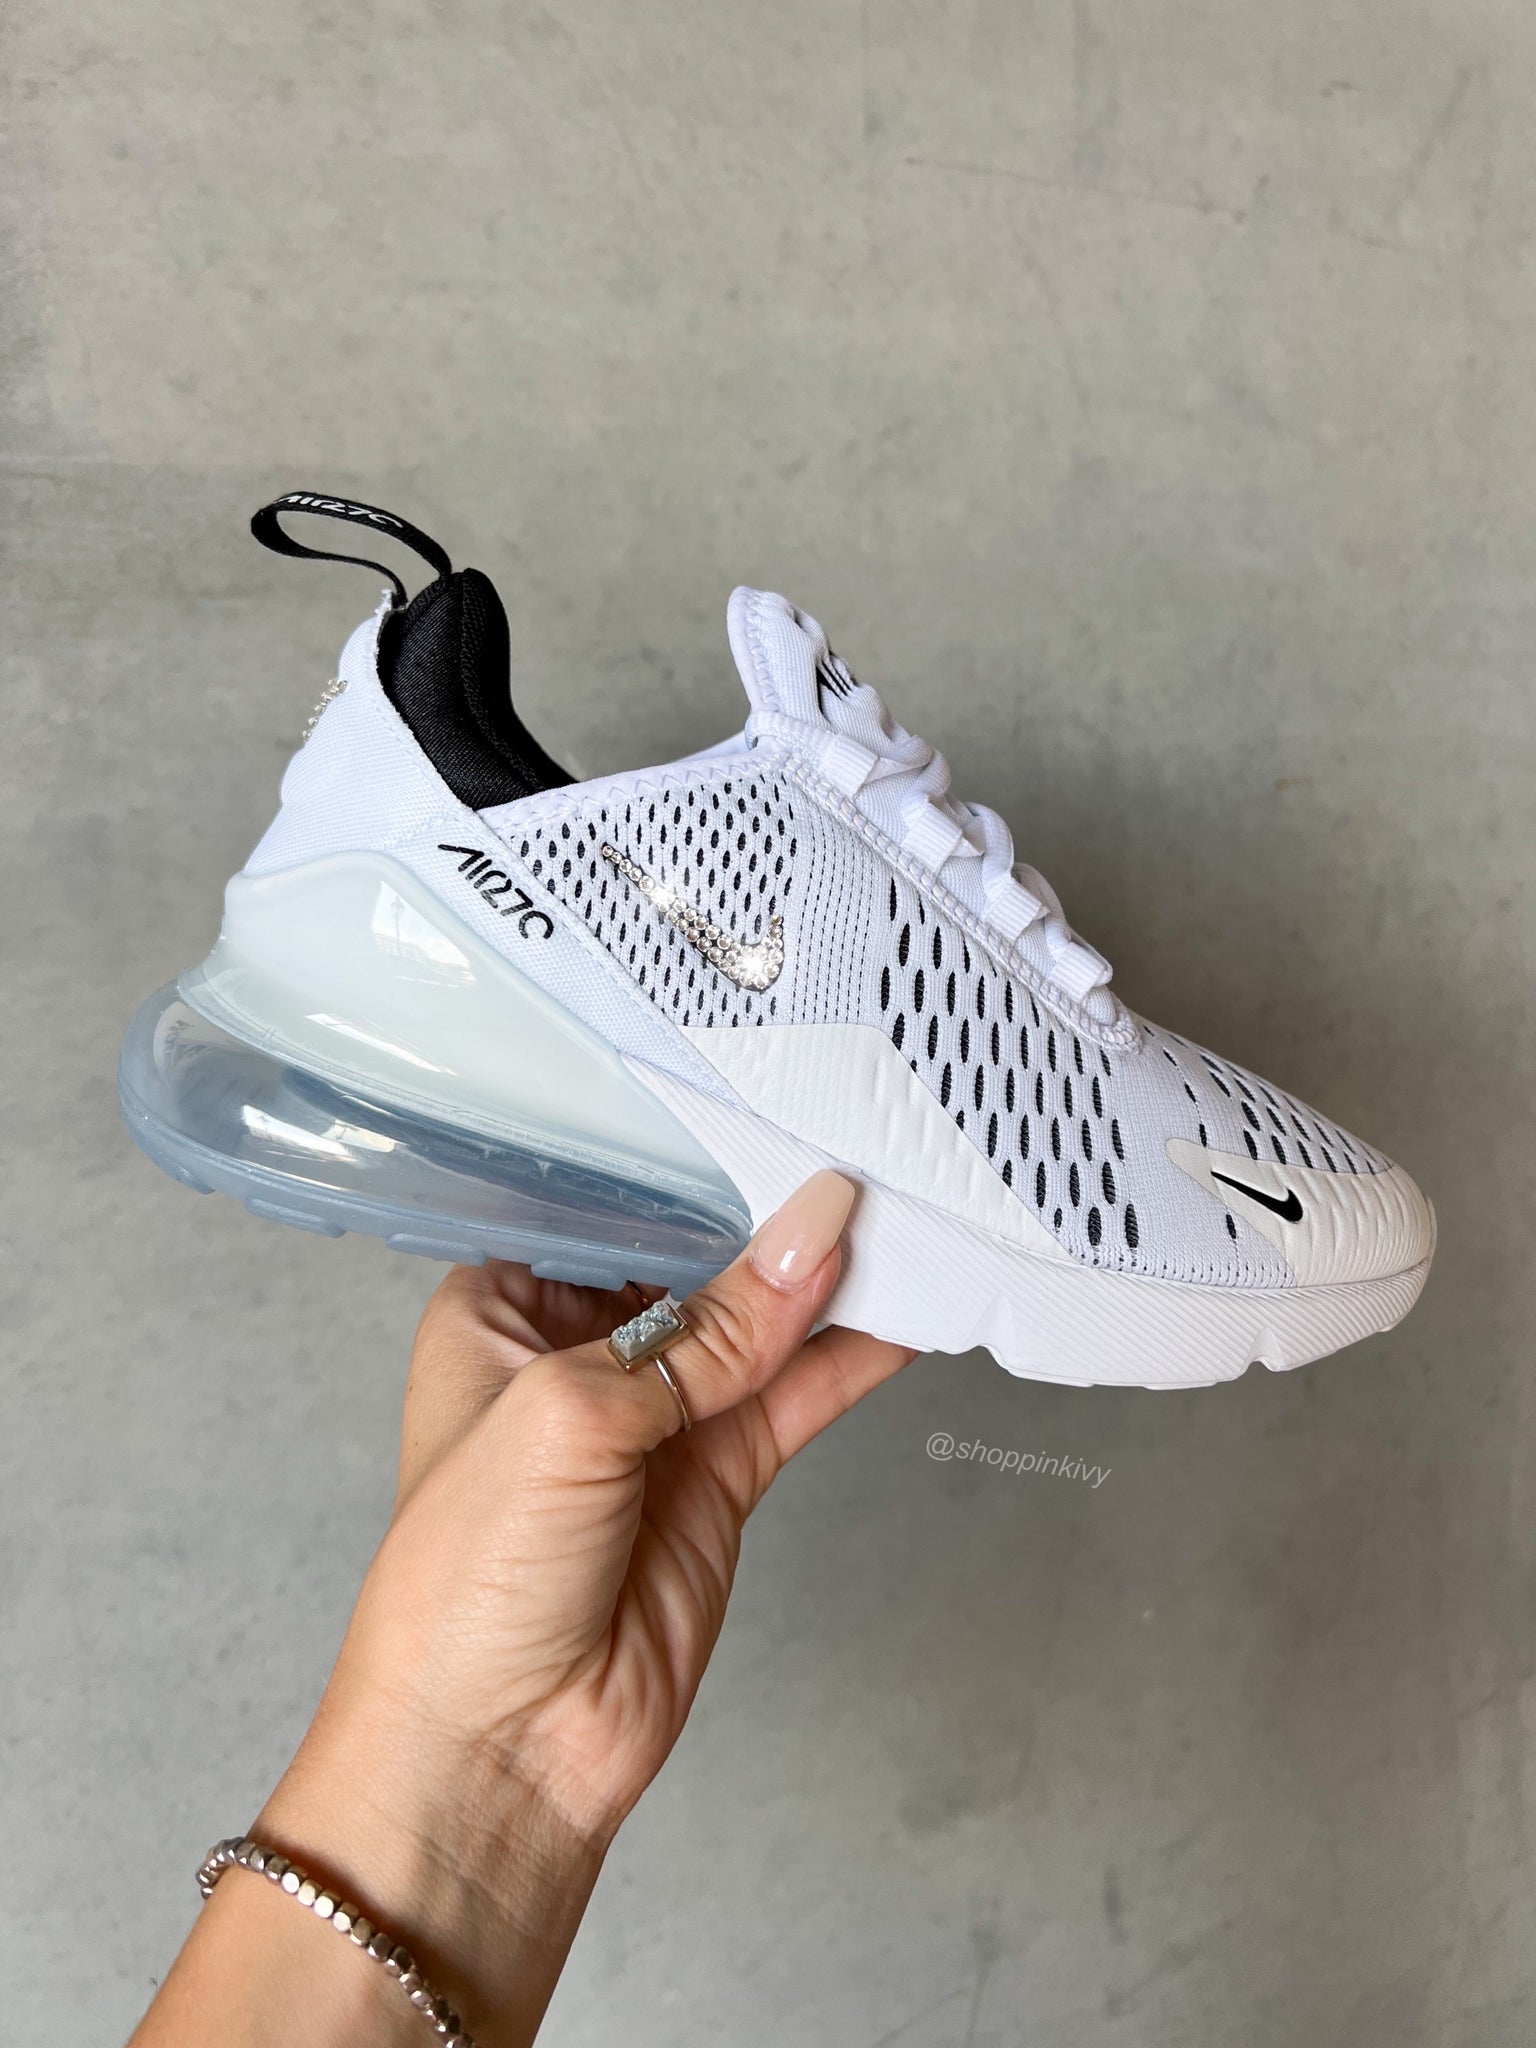 LIMITED RELEASE Nike Women Air Max 270 (White/Black) - 6.5